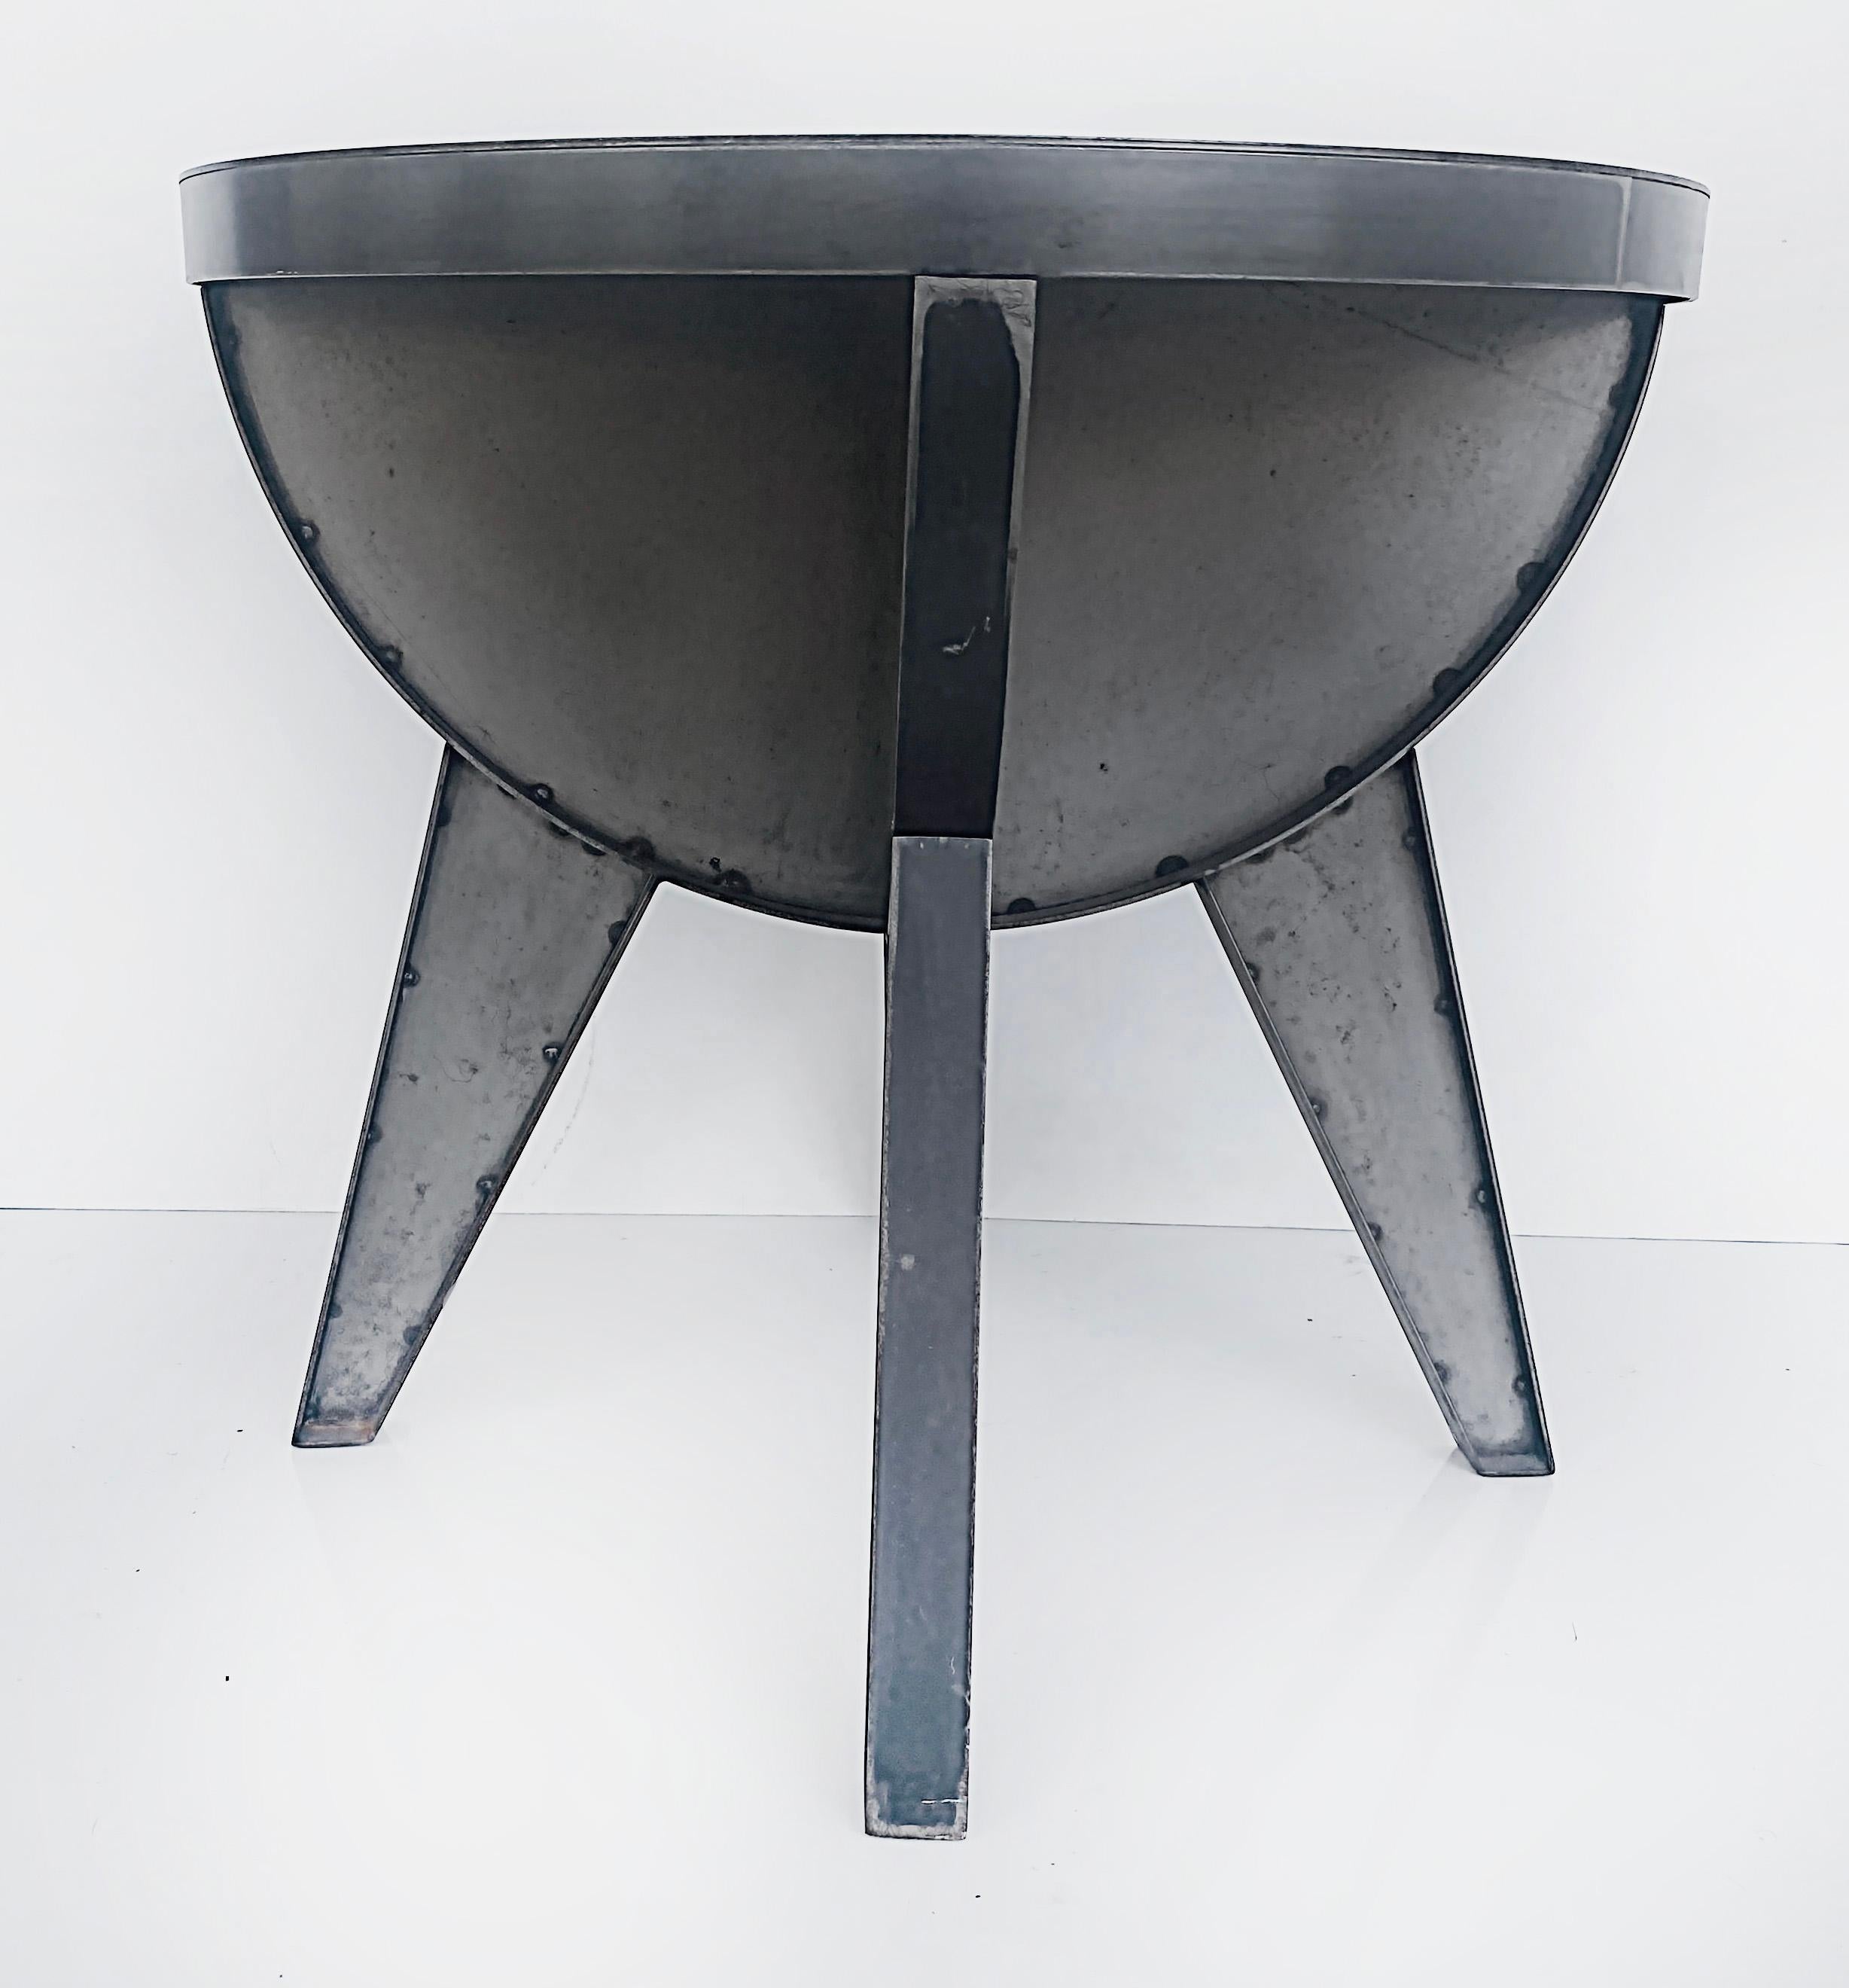 2010 Atomic Age Sputnik Studio Industrial Steel Side Tables, Pair In Good Condition For Sale In Miami, FL